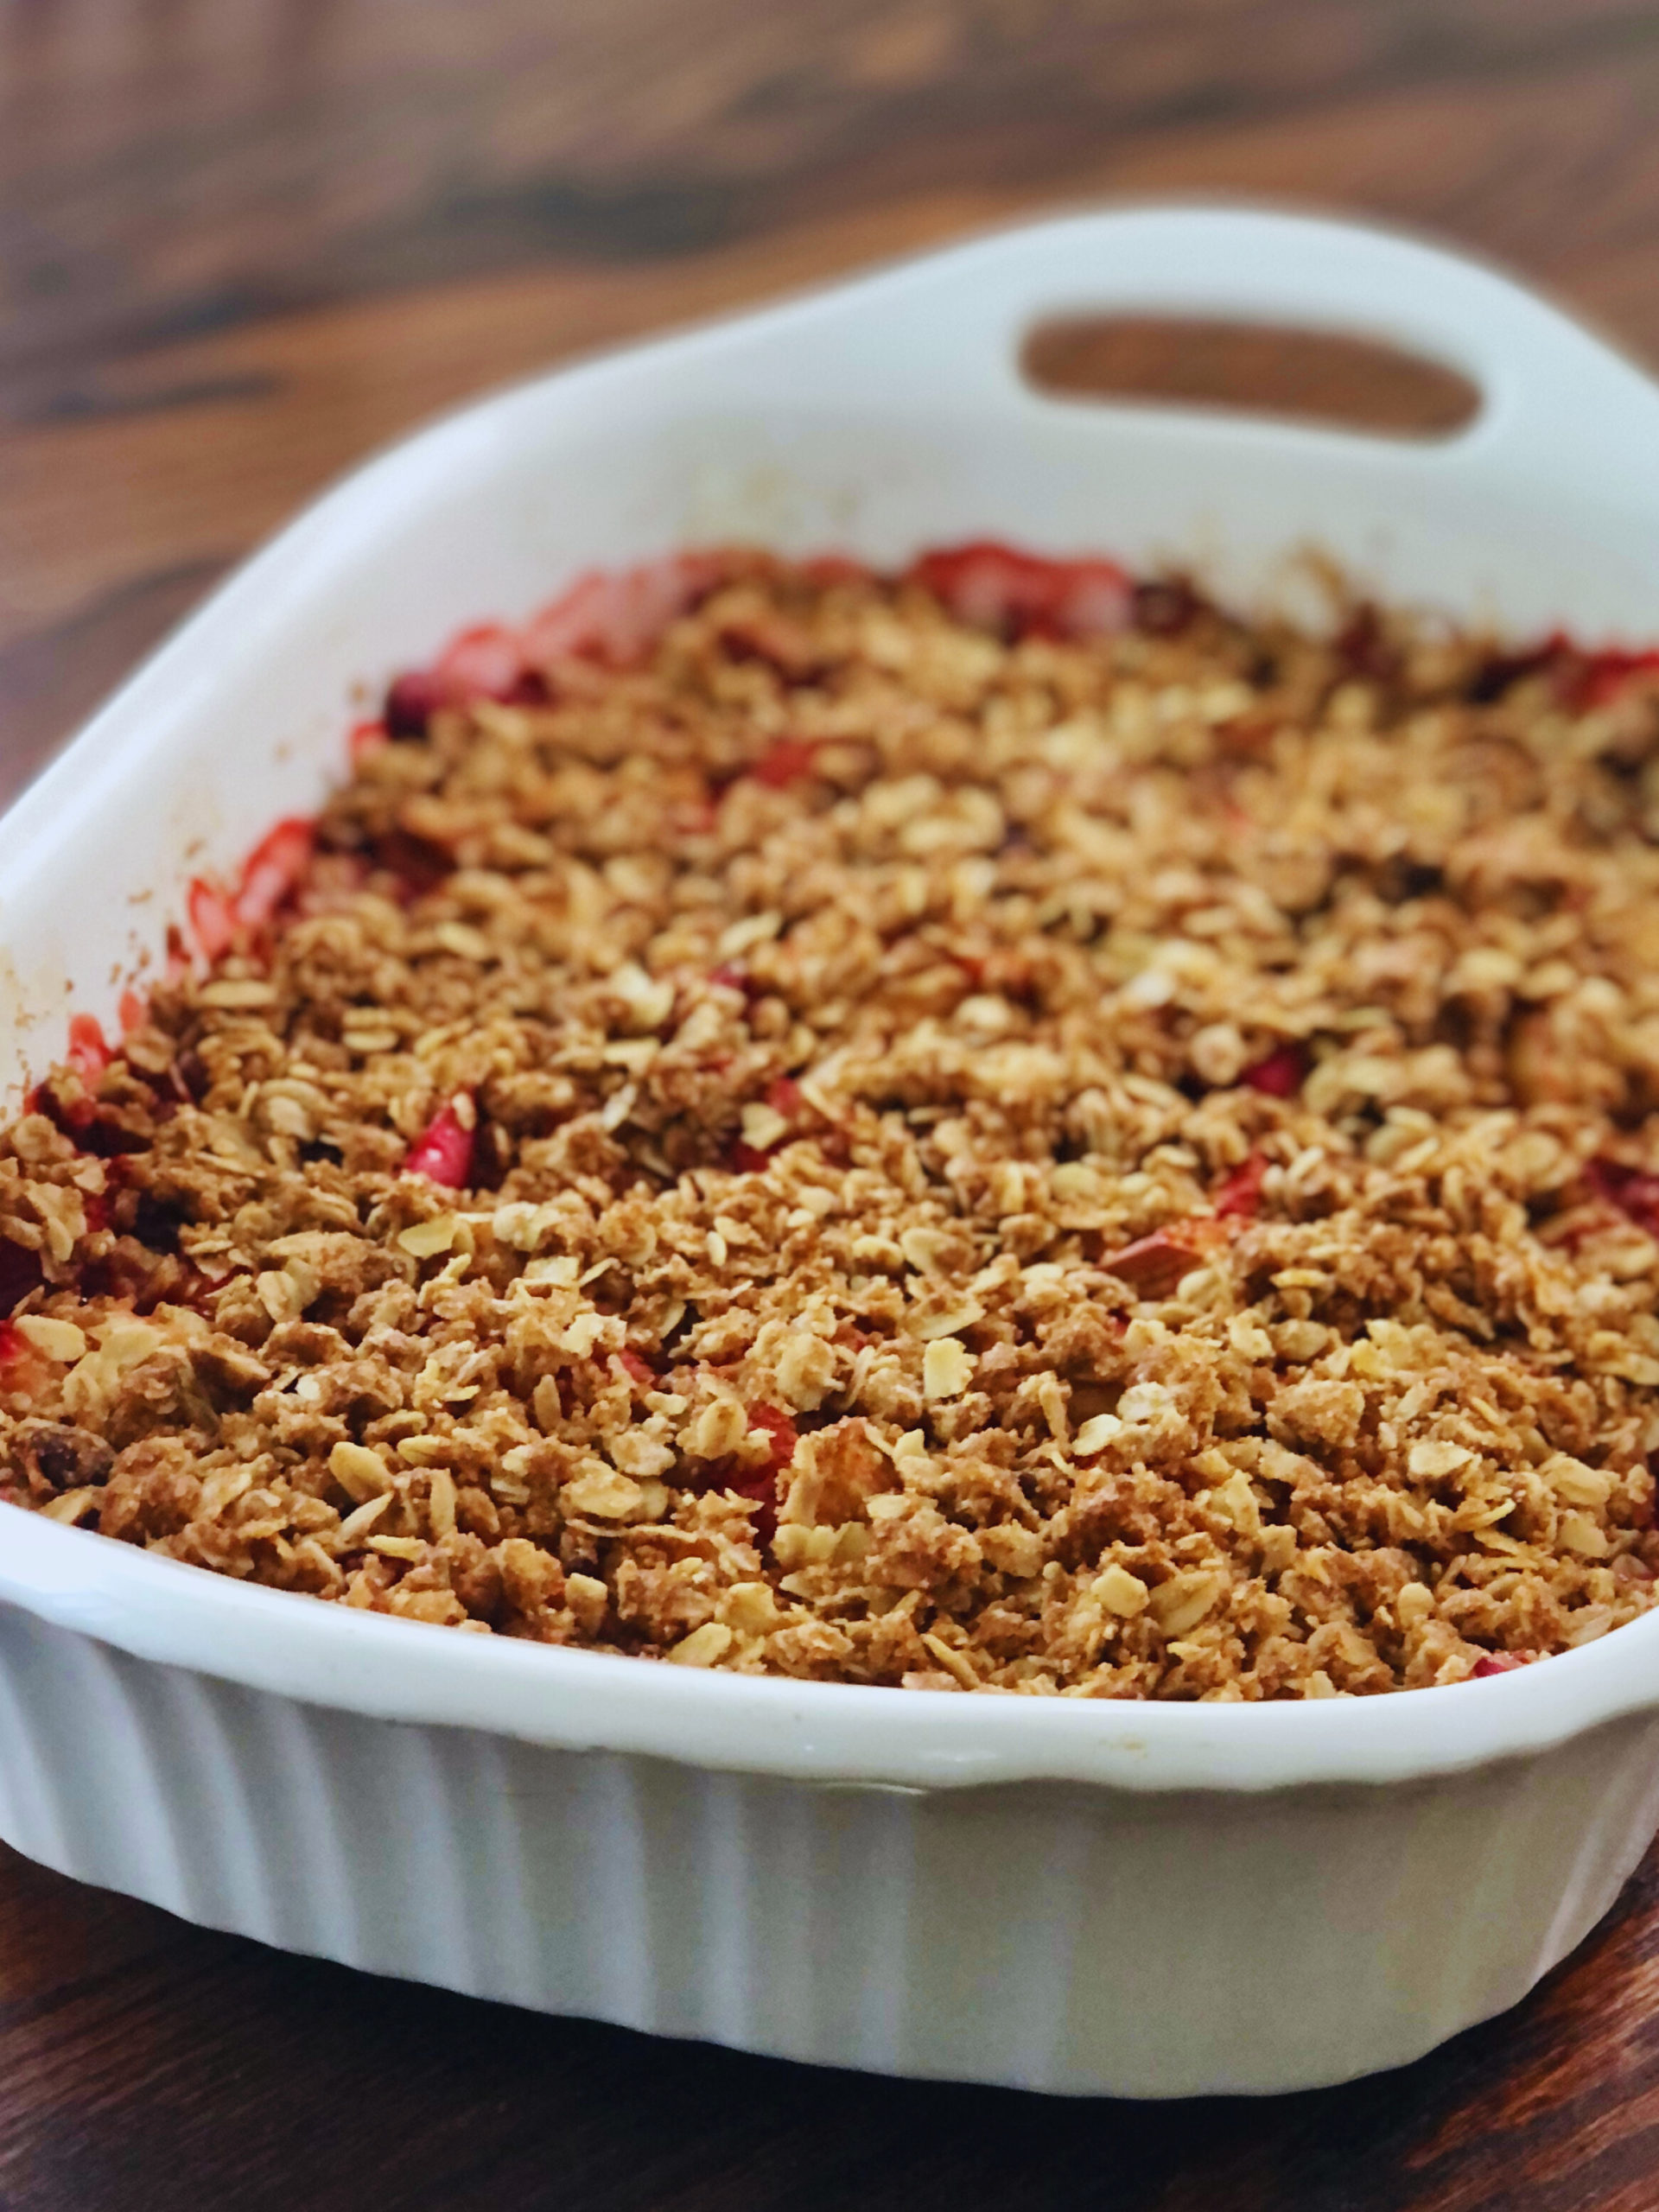 Baked Strawberry Rhubarb Crumble in white casserole dish on wooden table.